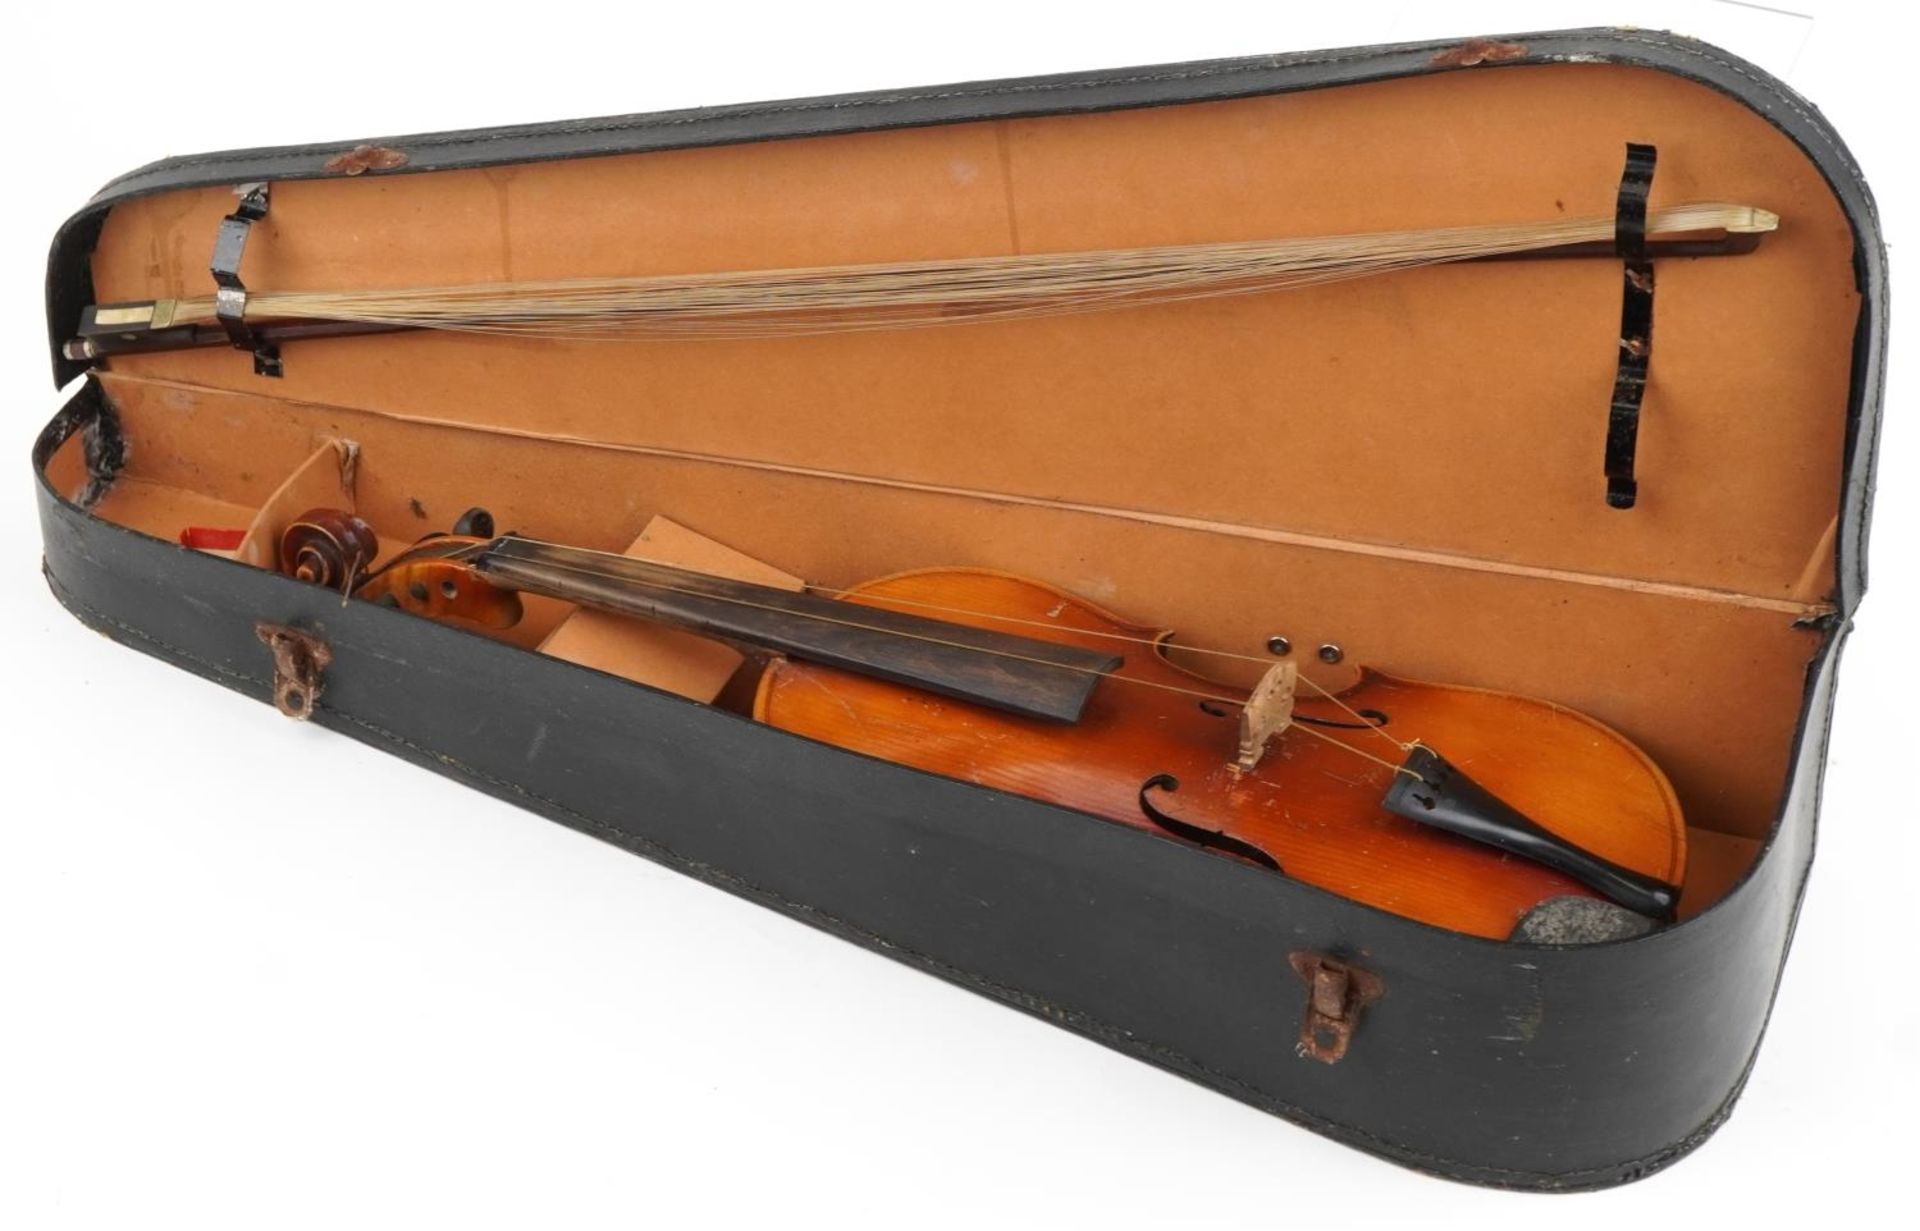 Old wooden violin with violin bow and case, the violin bearing an Antonio Stradivarius label, the - Image 5 of 5